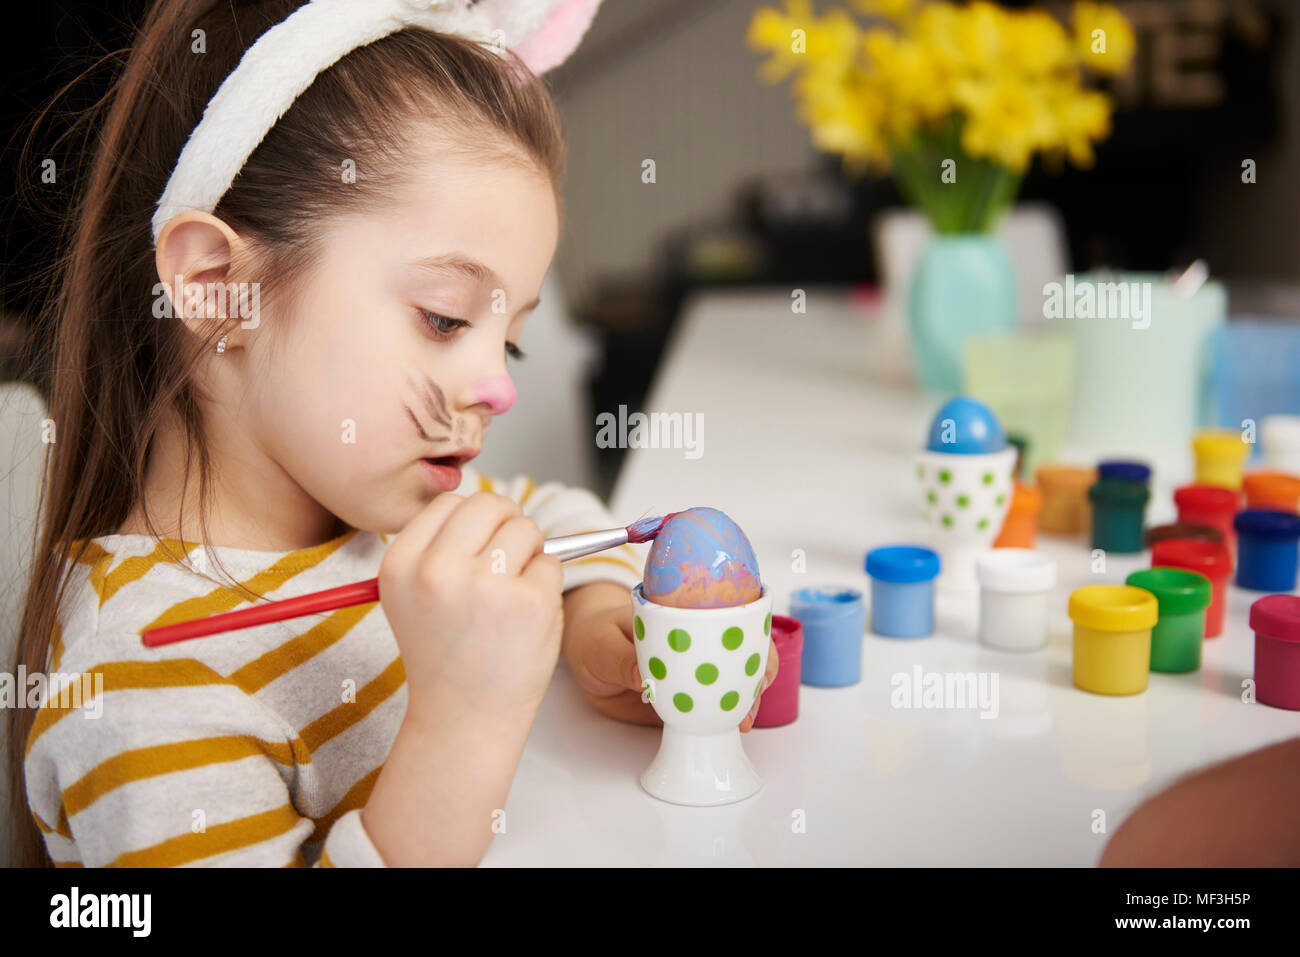 Girl with bunny ears sitting at table painting Easter eggs Stock Photo